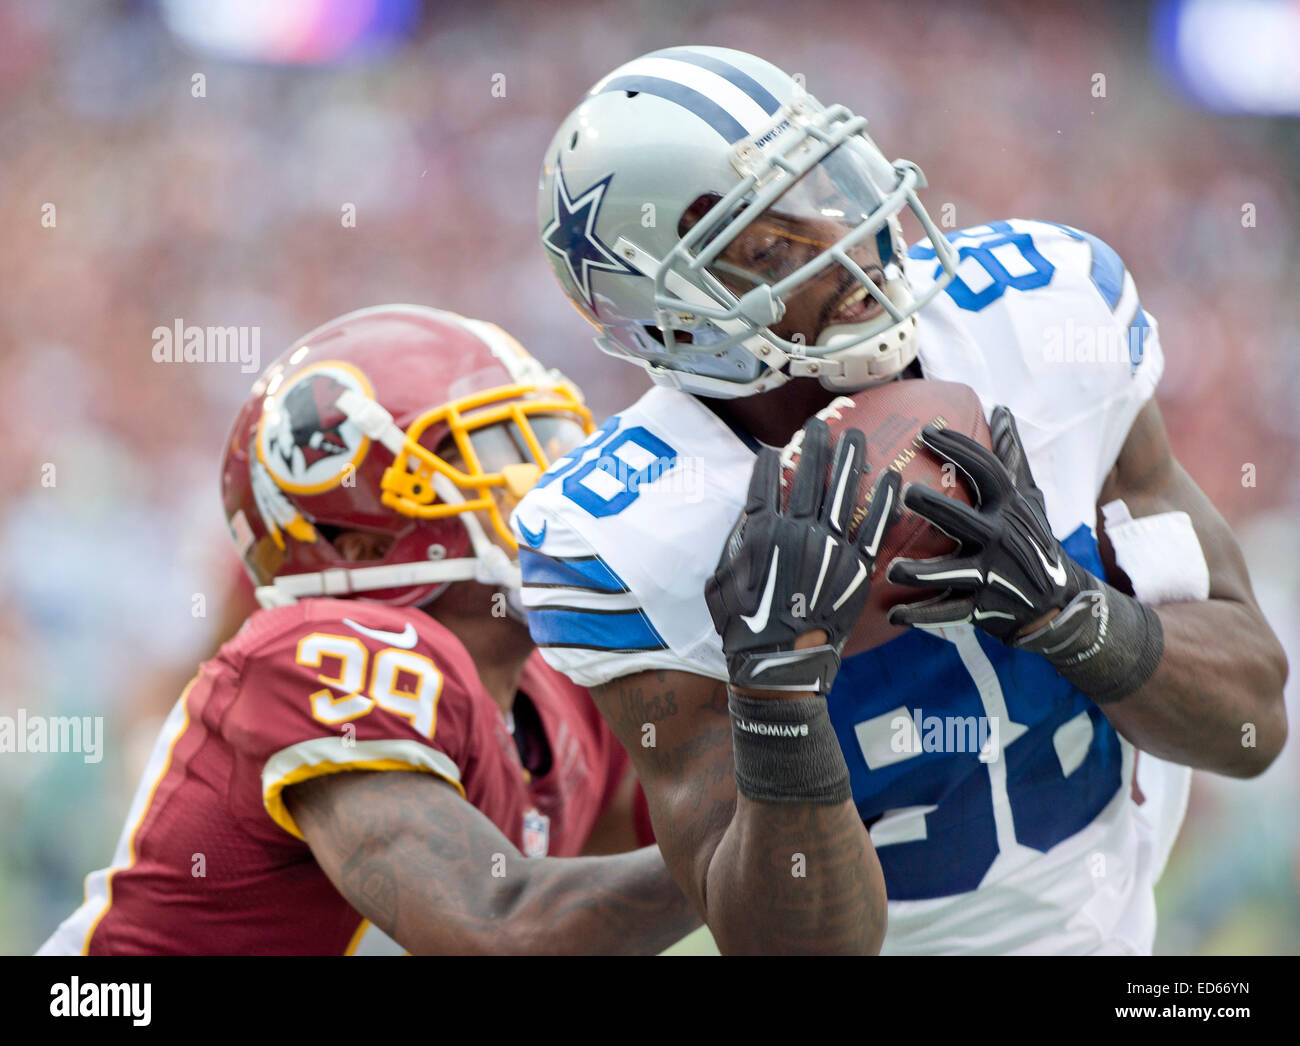 Dallas Cowboys wide receiver Dez Bryant (88) catches a touchdown pass against the Washington Redskins cornerback David Amerson (39) in the first quarter at FedEx Field in Landover, Maryland on Sunday, December 28, 2014. Credit: Ron Sachs/CNP Stock Photo